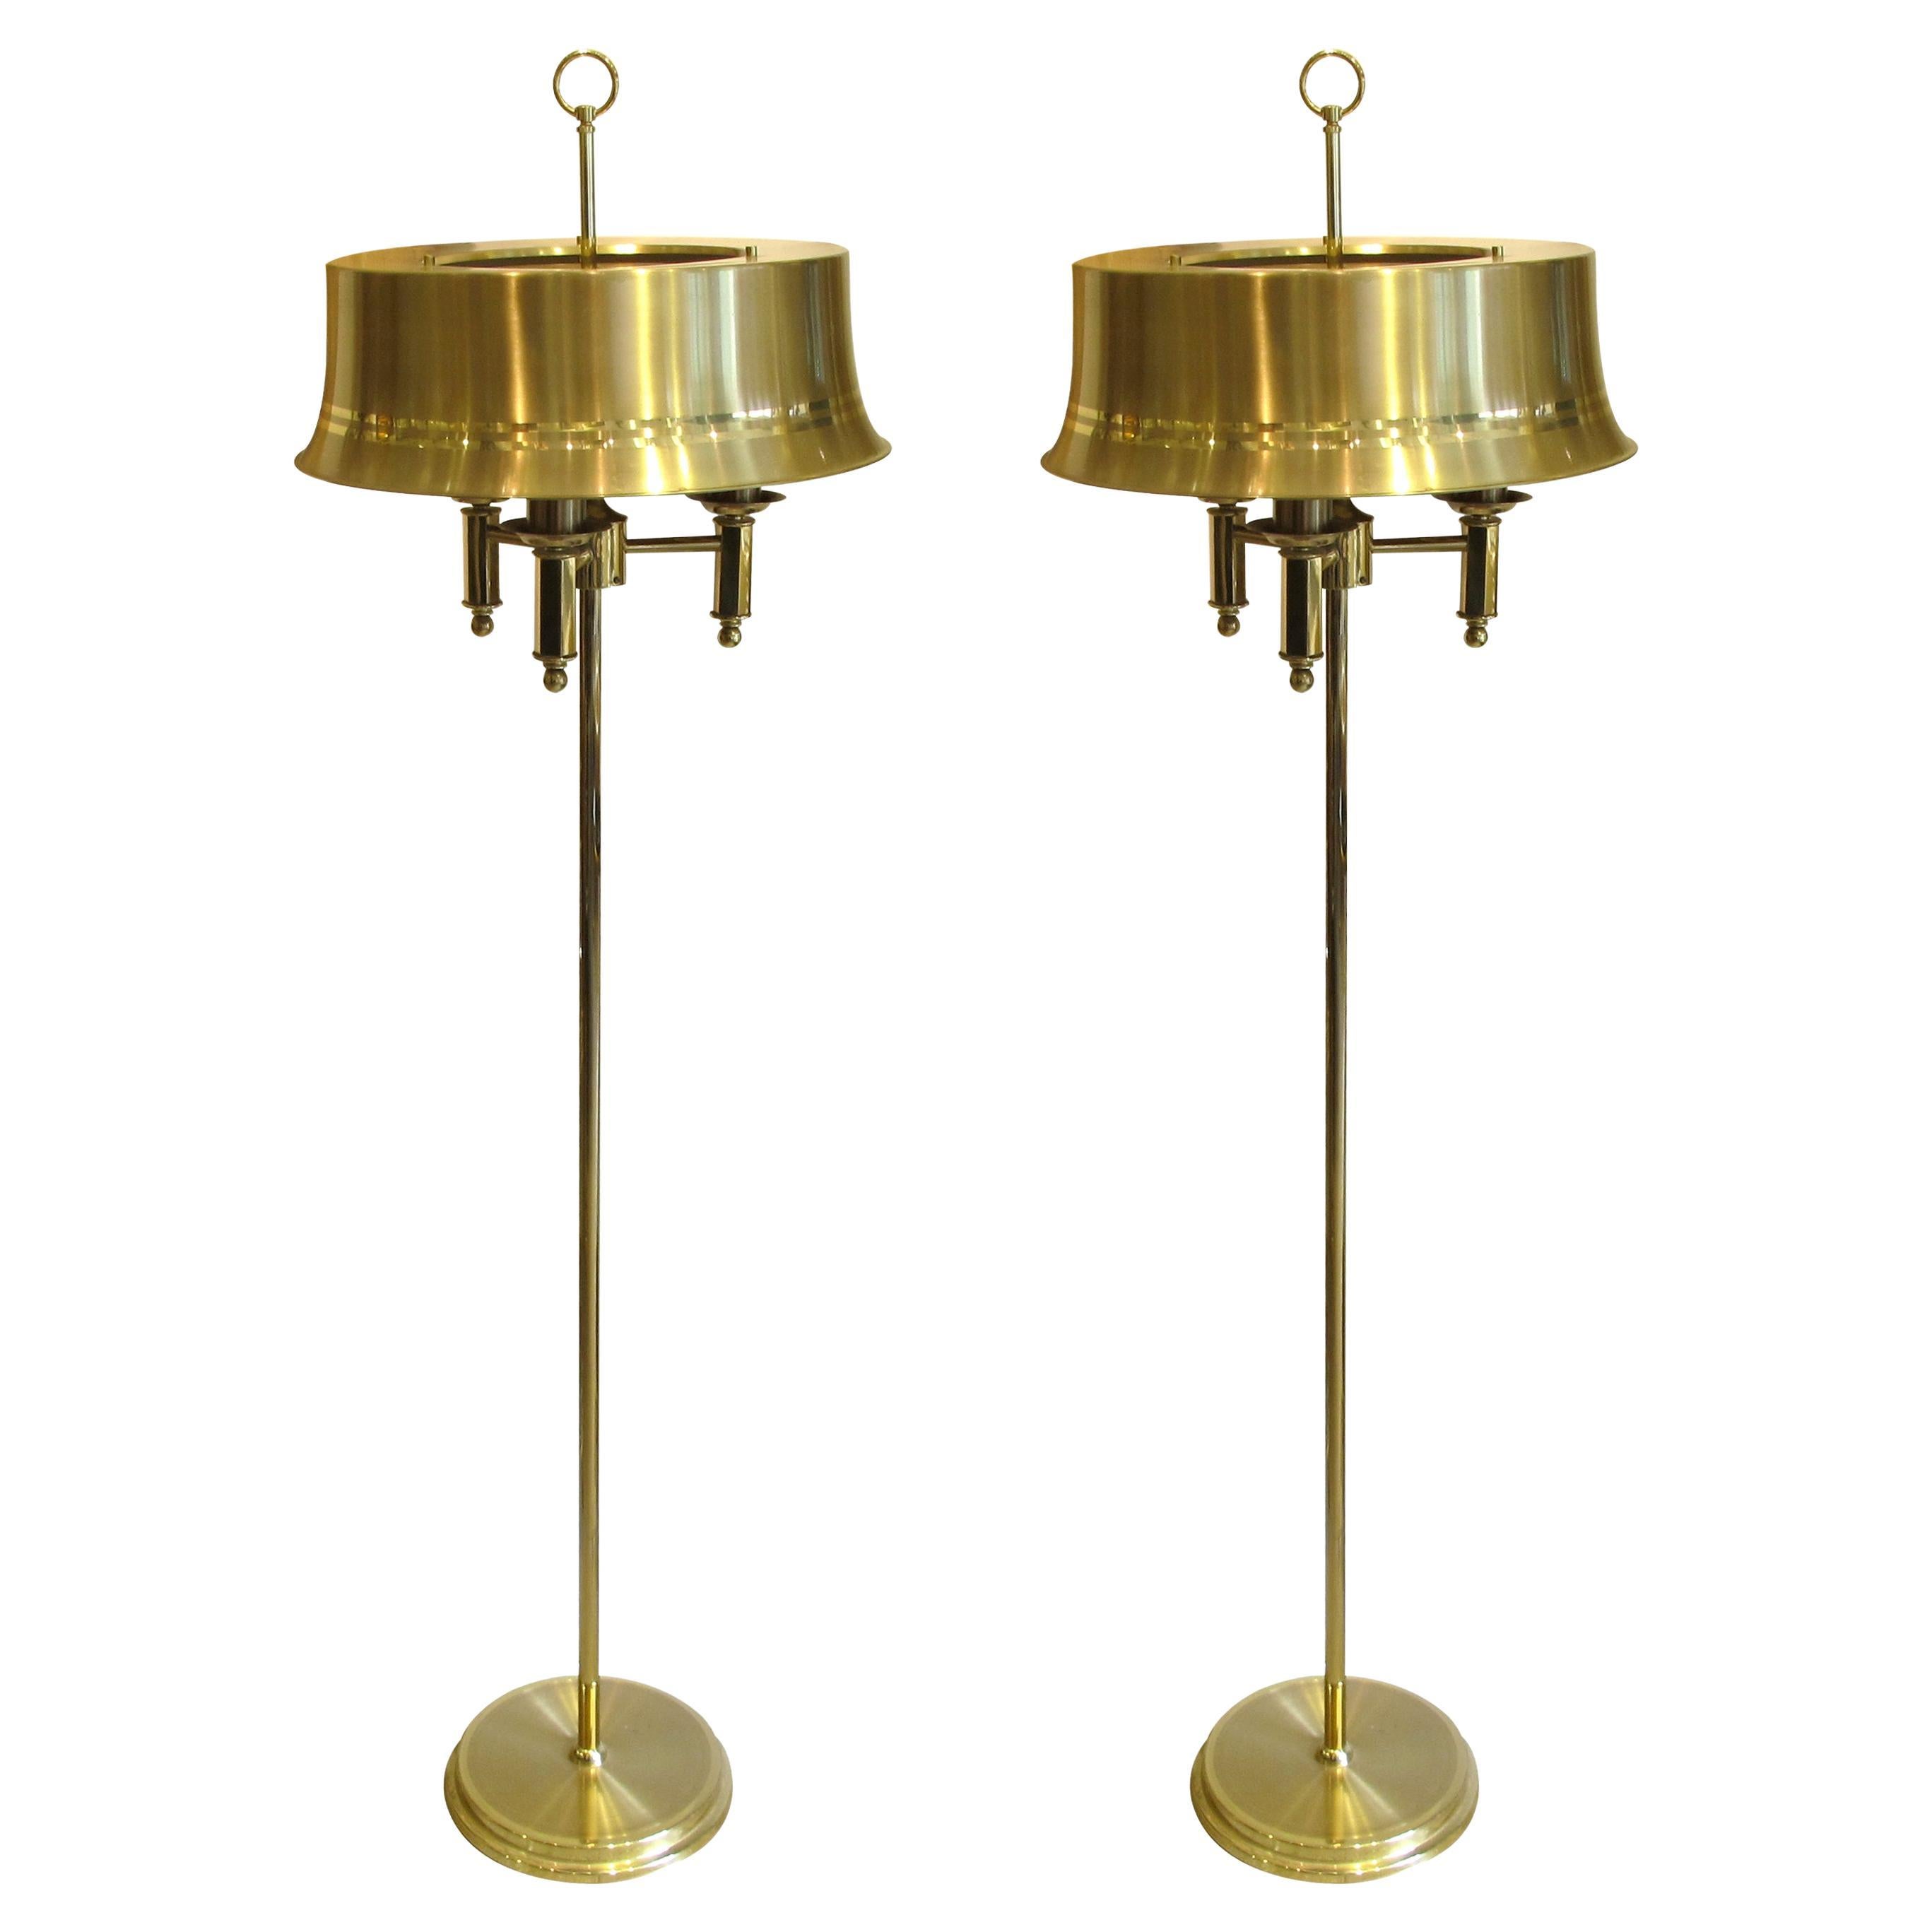 Pair of 1970s Swedish Brass Floor Lamps with Large Hat-Shaped Brass Shades 